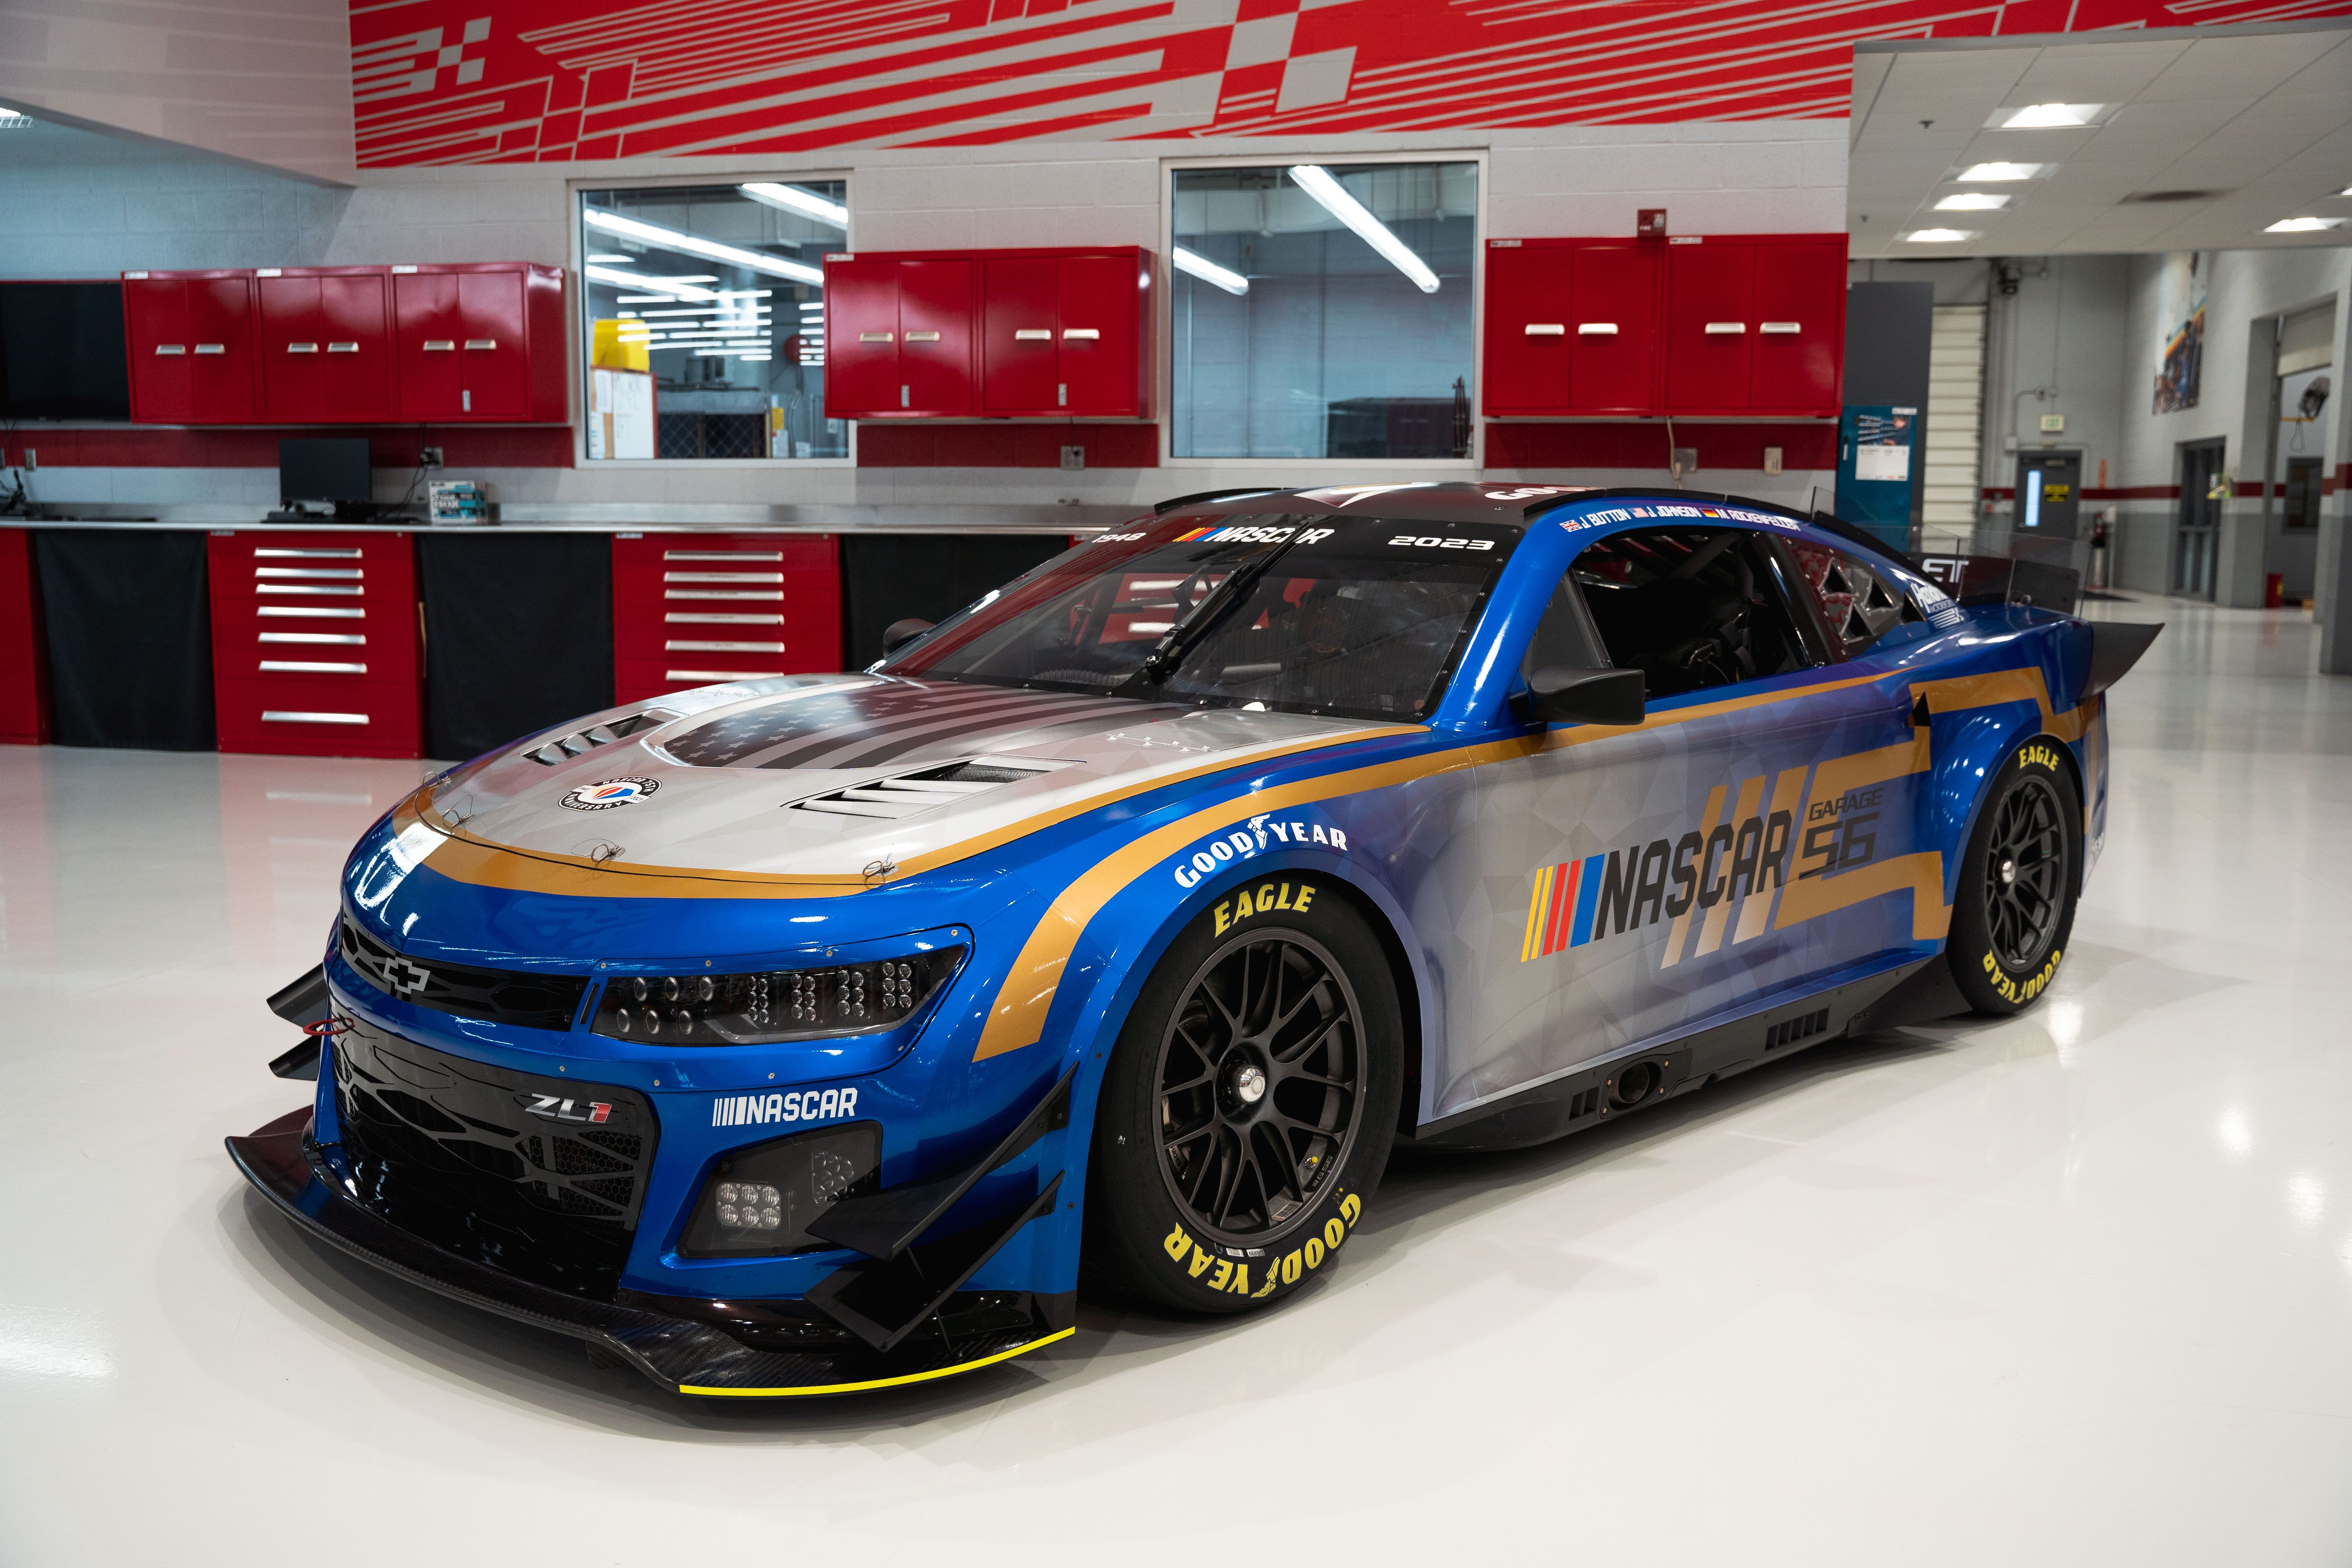 NASCAR Next Gen car takes on 24 Hours of Le Mans race in France – NBC Boston